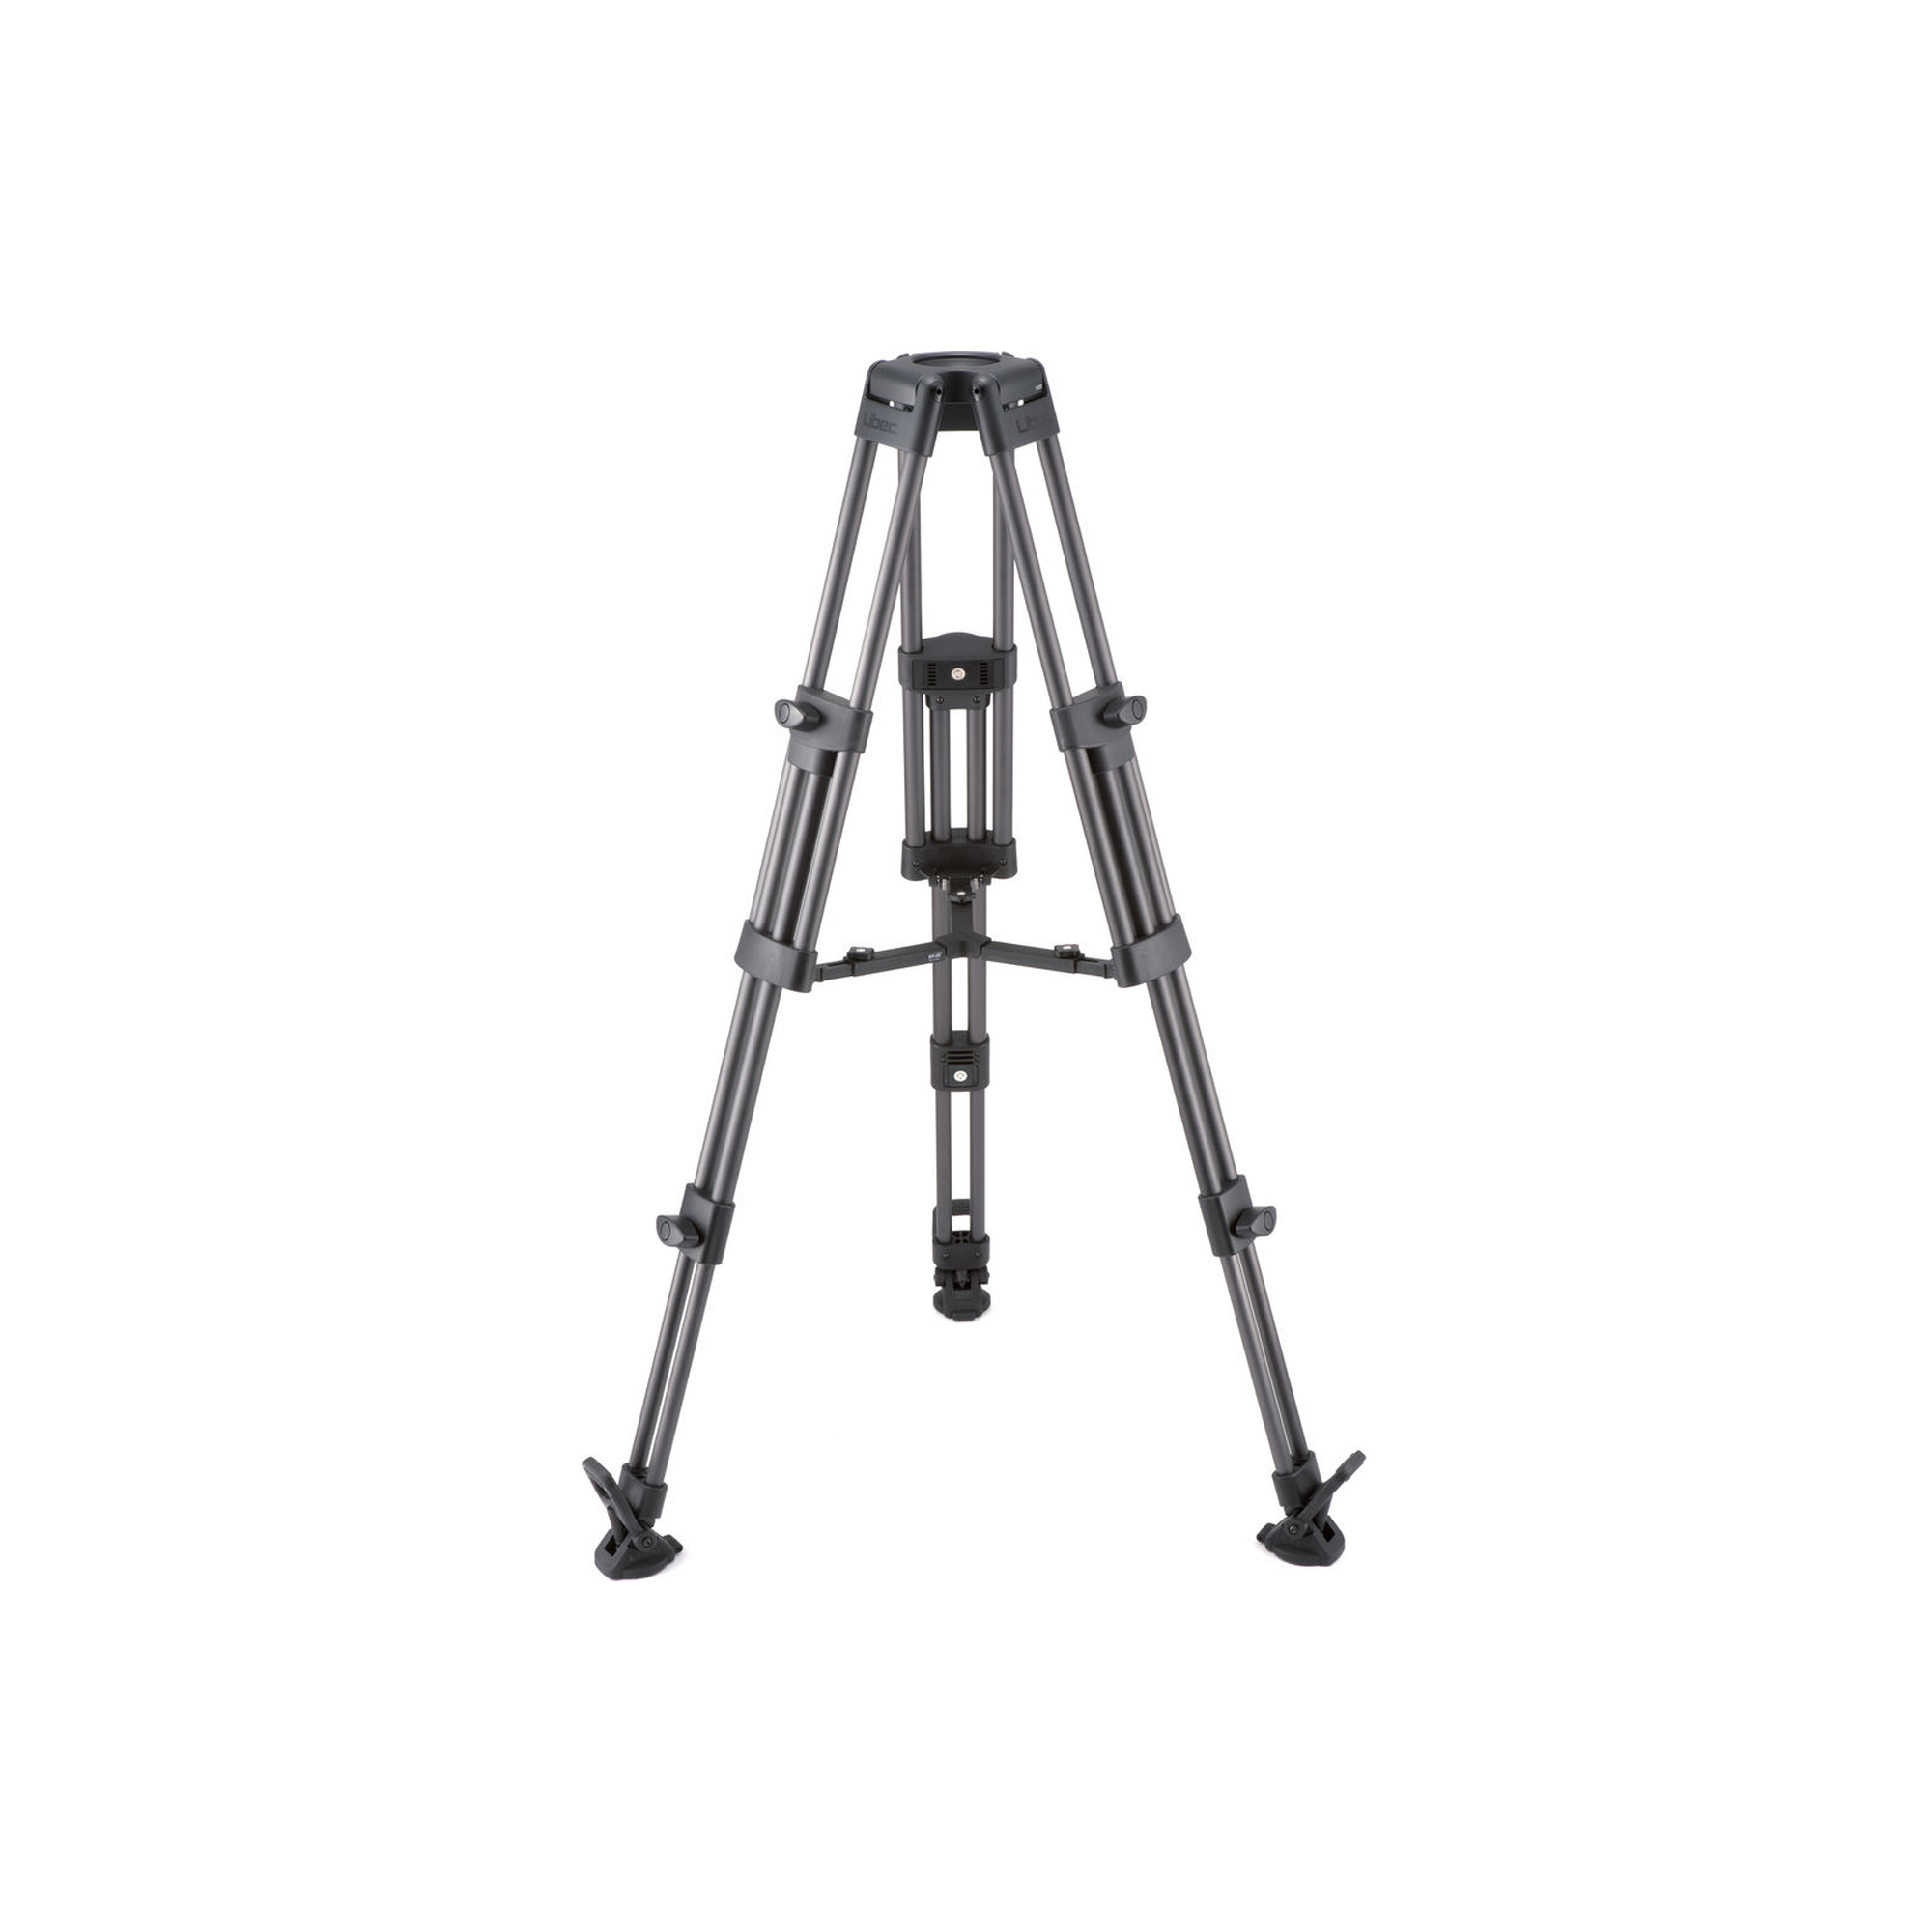 Libec 2stage heavy duty tripod with 100mm bowl